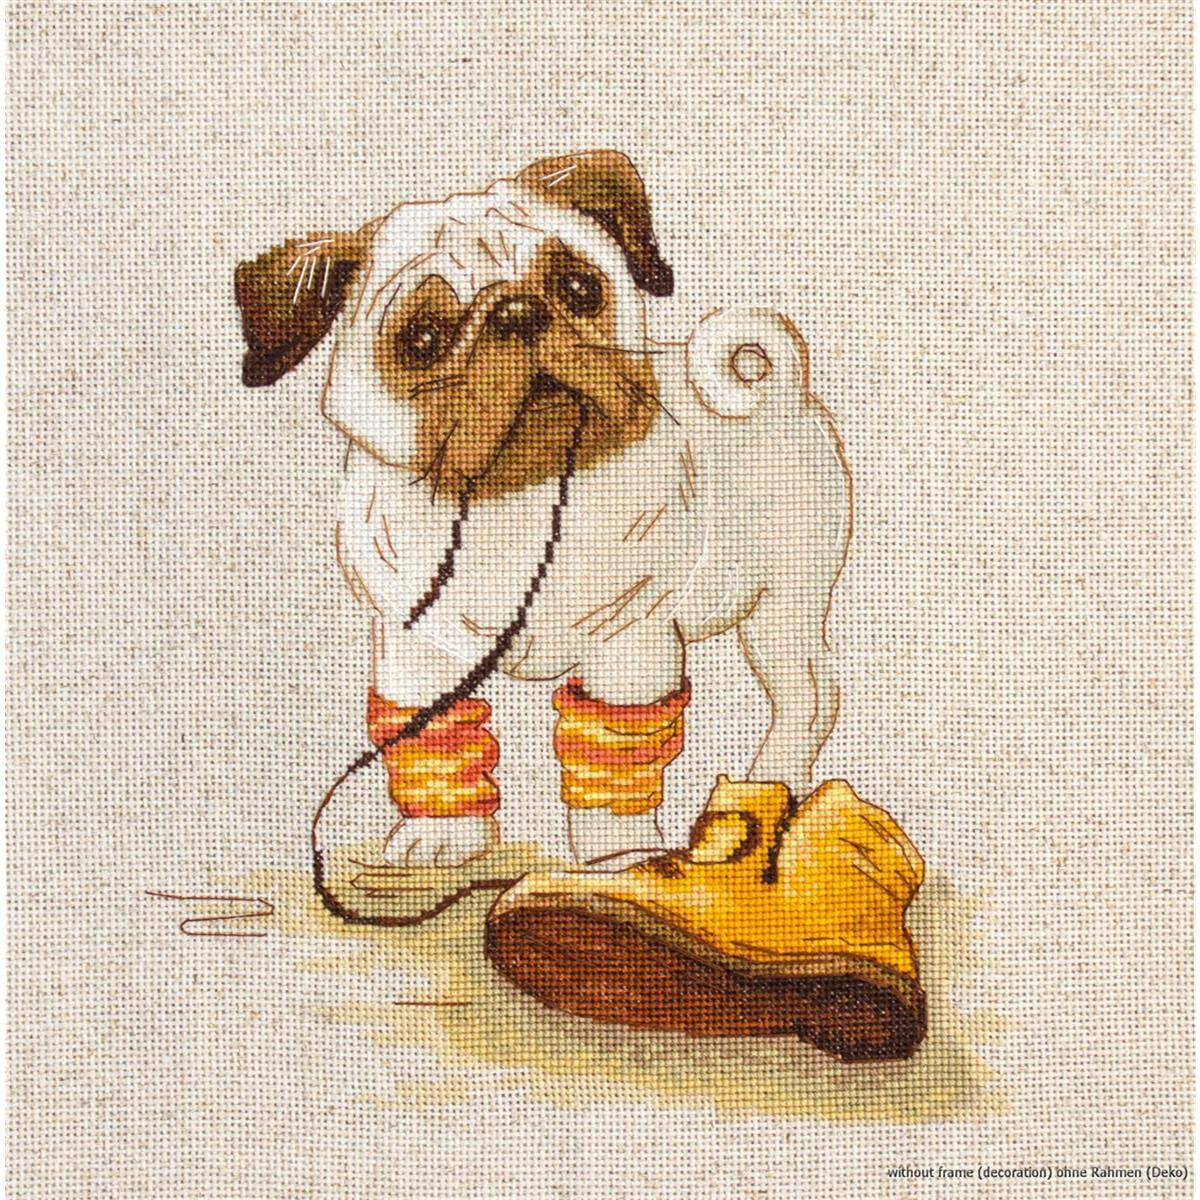 This adorable cross stitch pattern shows a pug puppy...